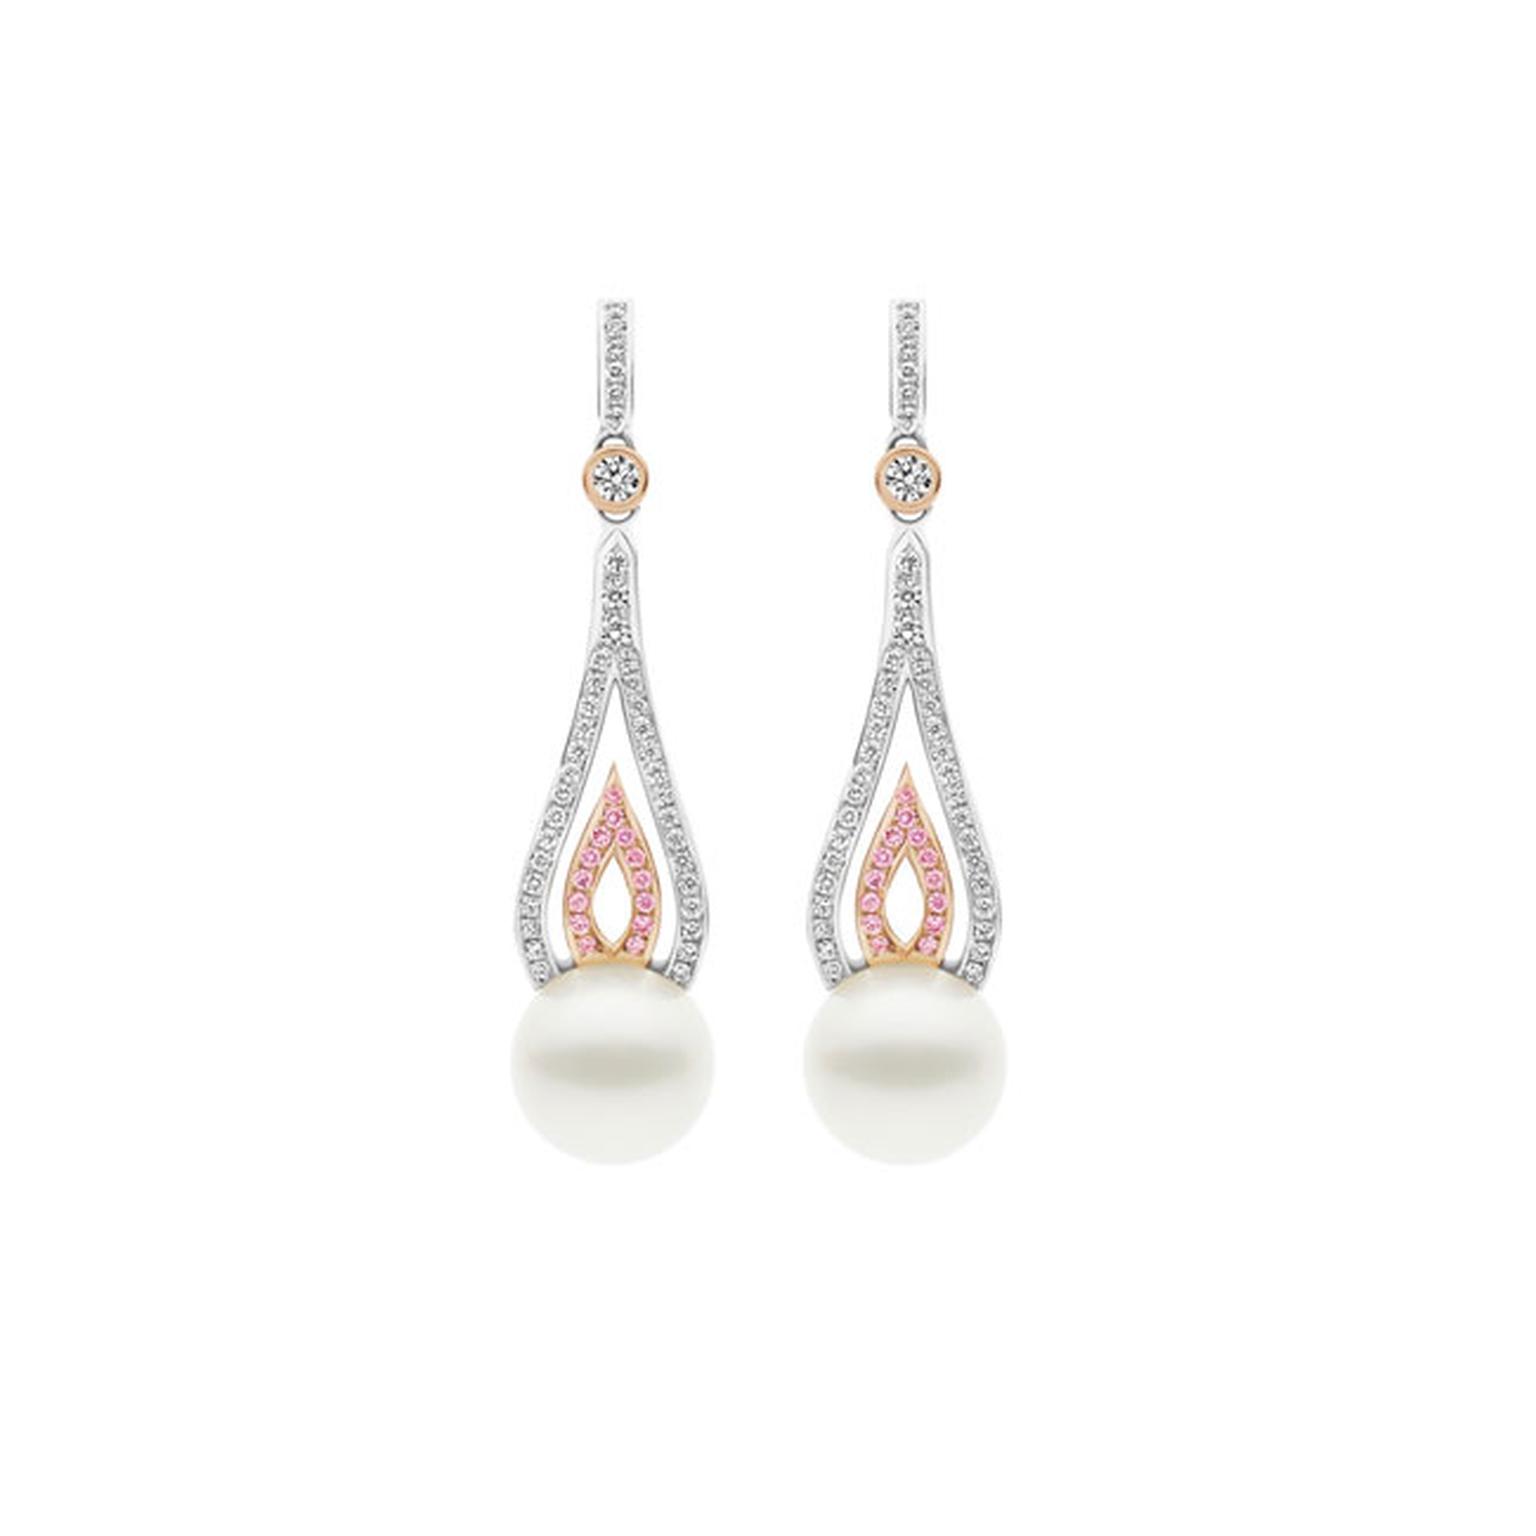 Kailis flame earrings with pearls and white and pink pavé diamonds_main